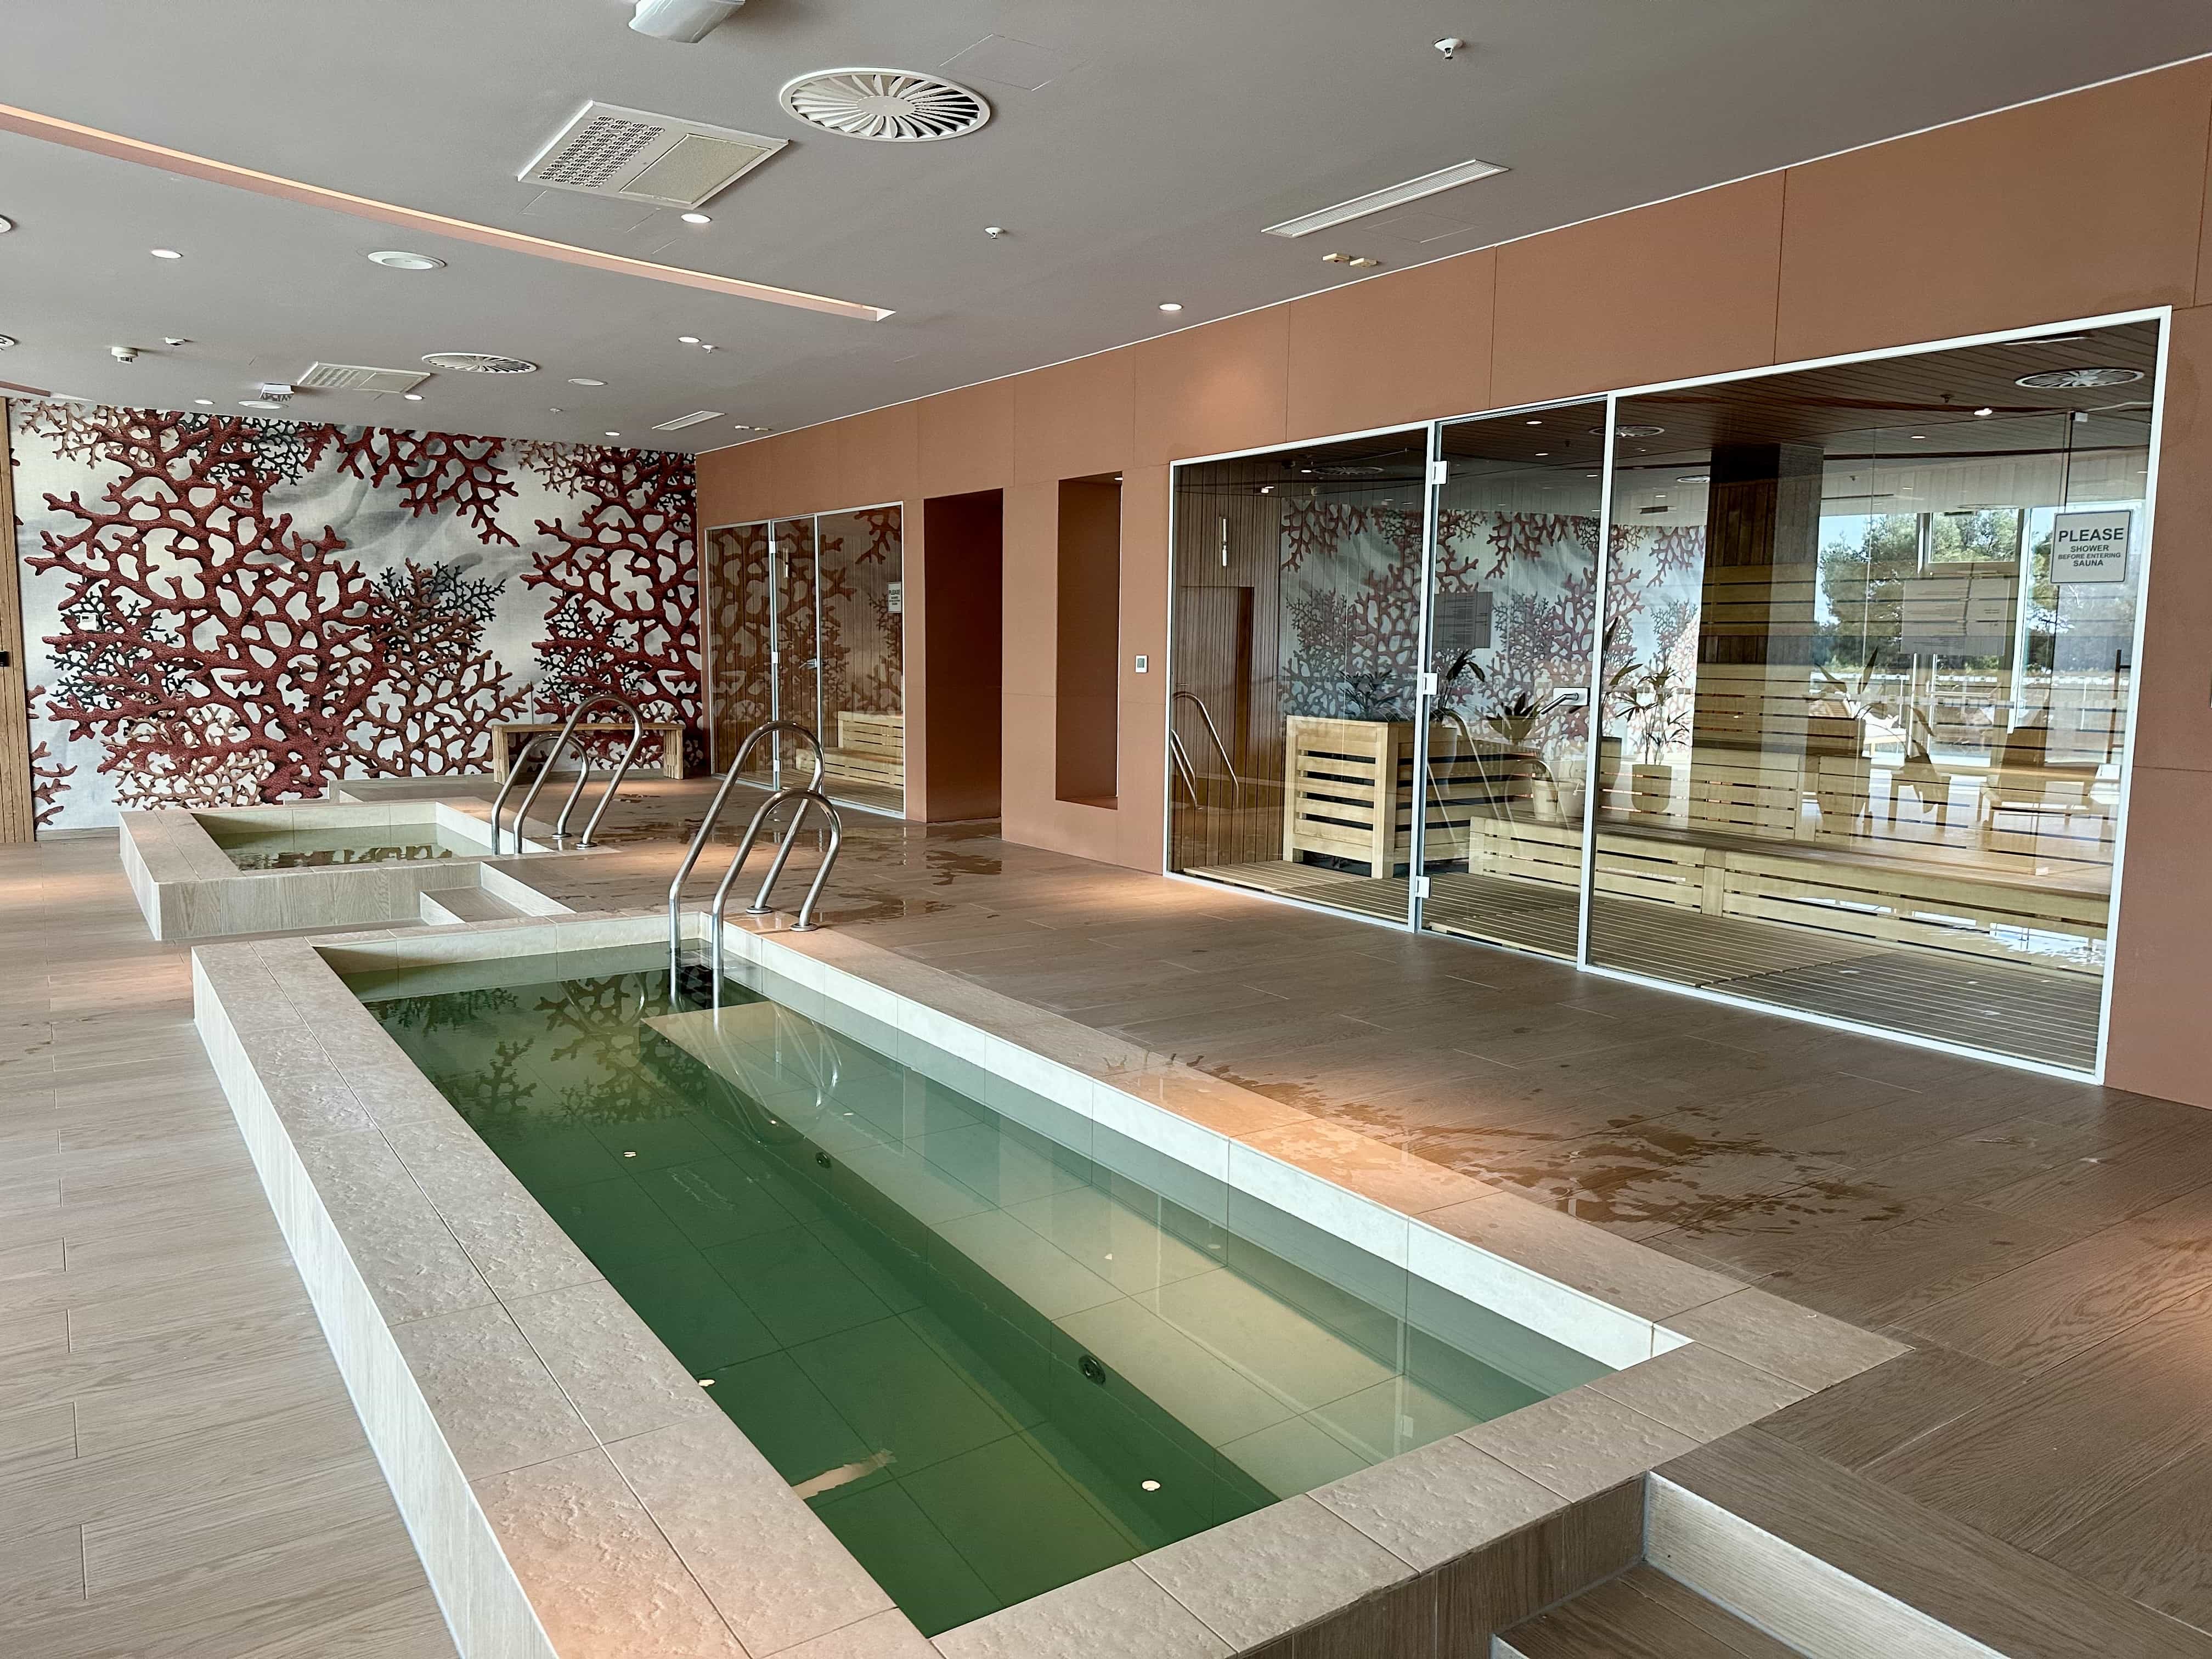 Two plunge pools in front of two saunas, and the opening to a shower room